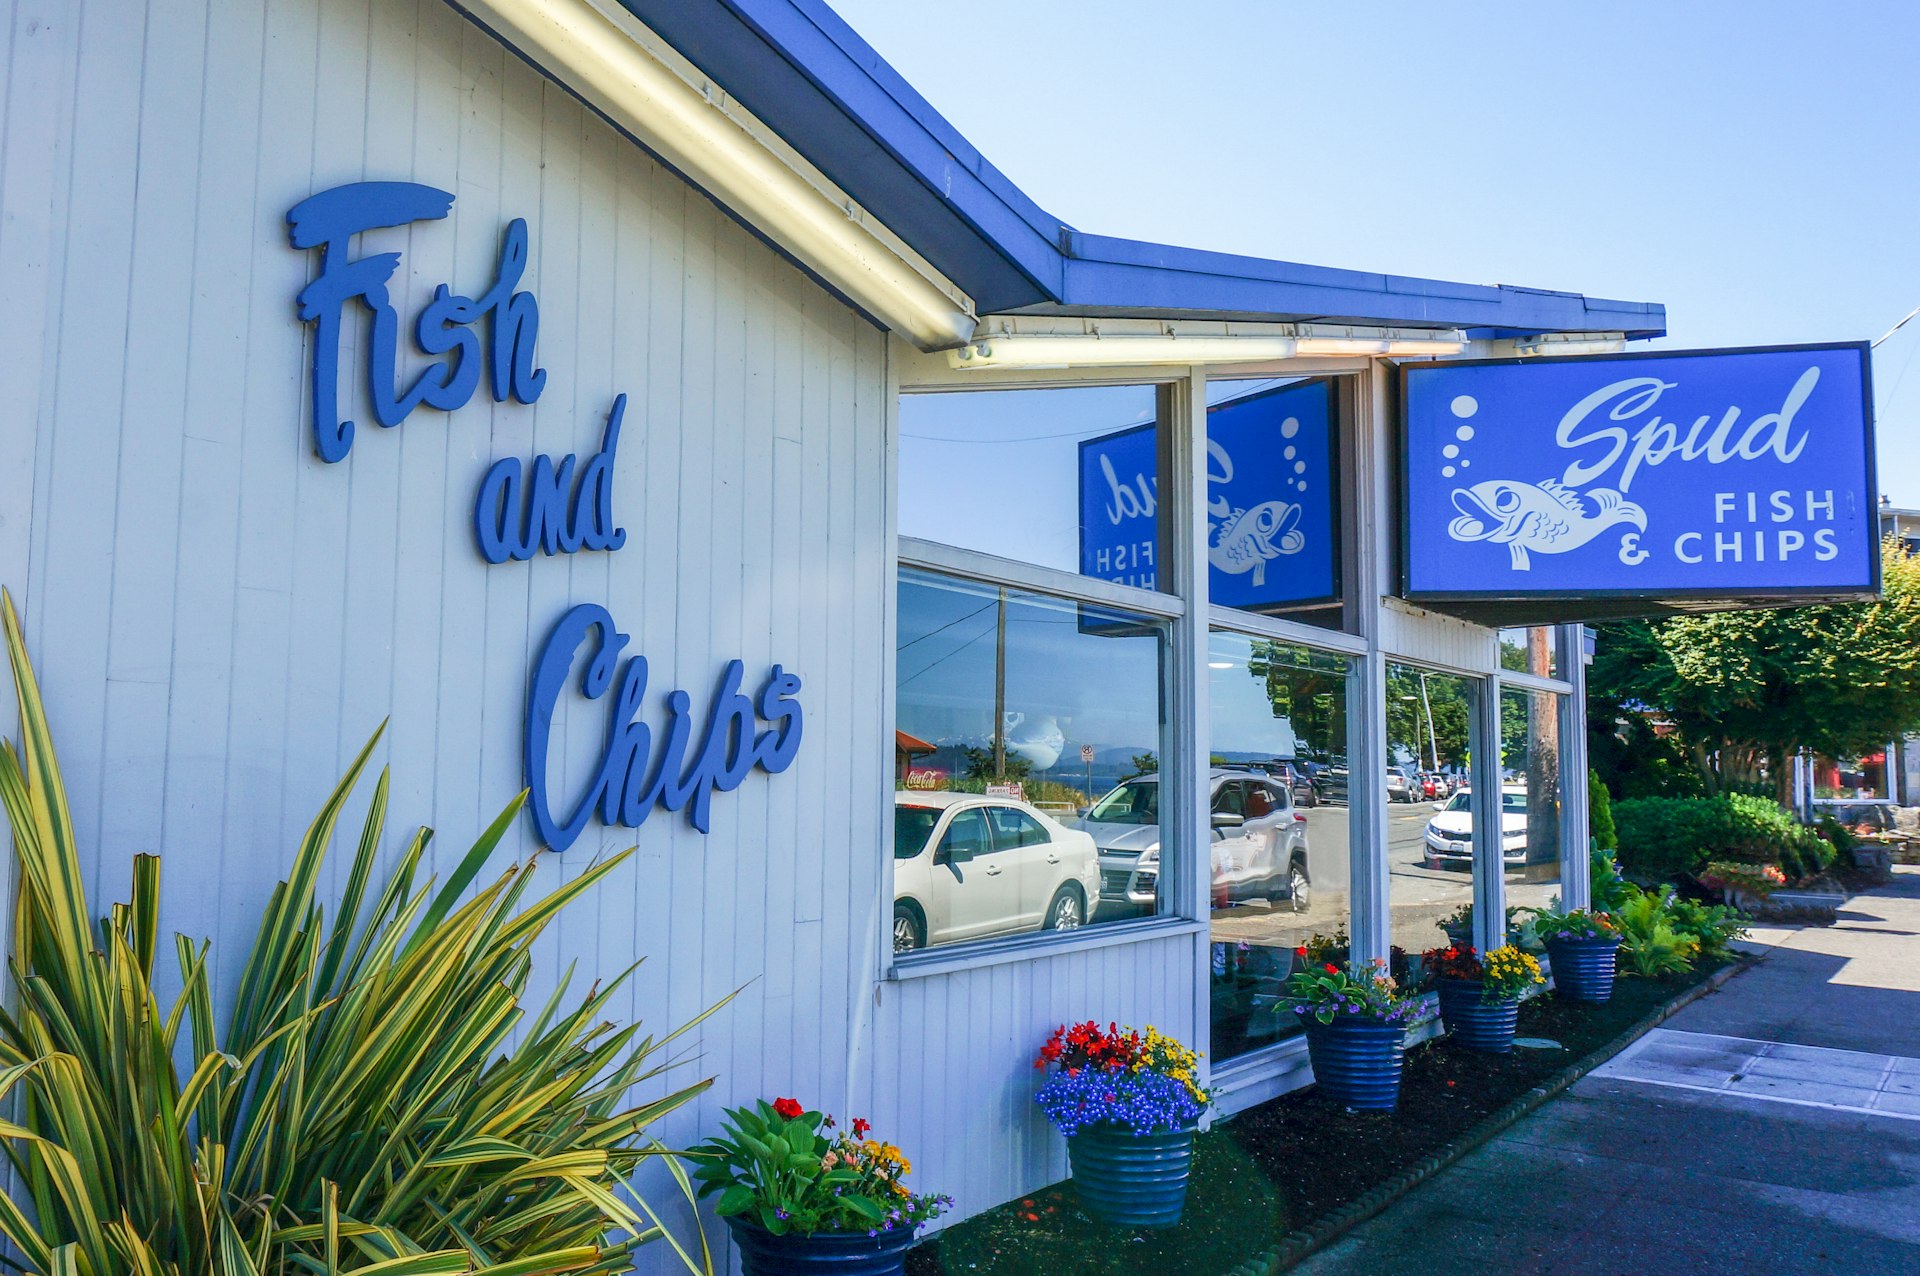 Spuds Fish and Chips, which claims to be Seattle’s first fast-food restaurant © Valerie Stimac / Lonely Planet